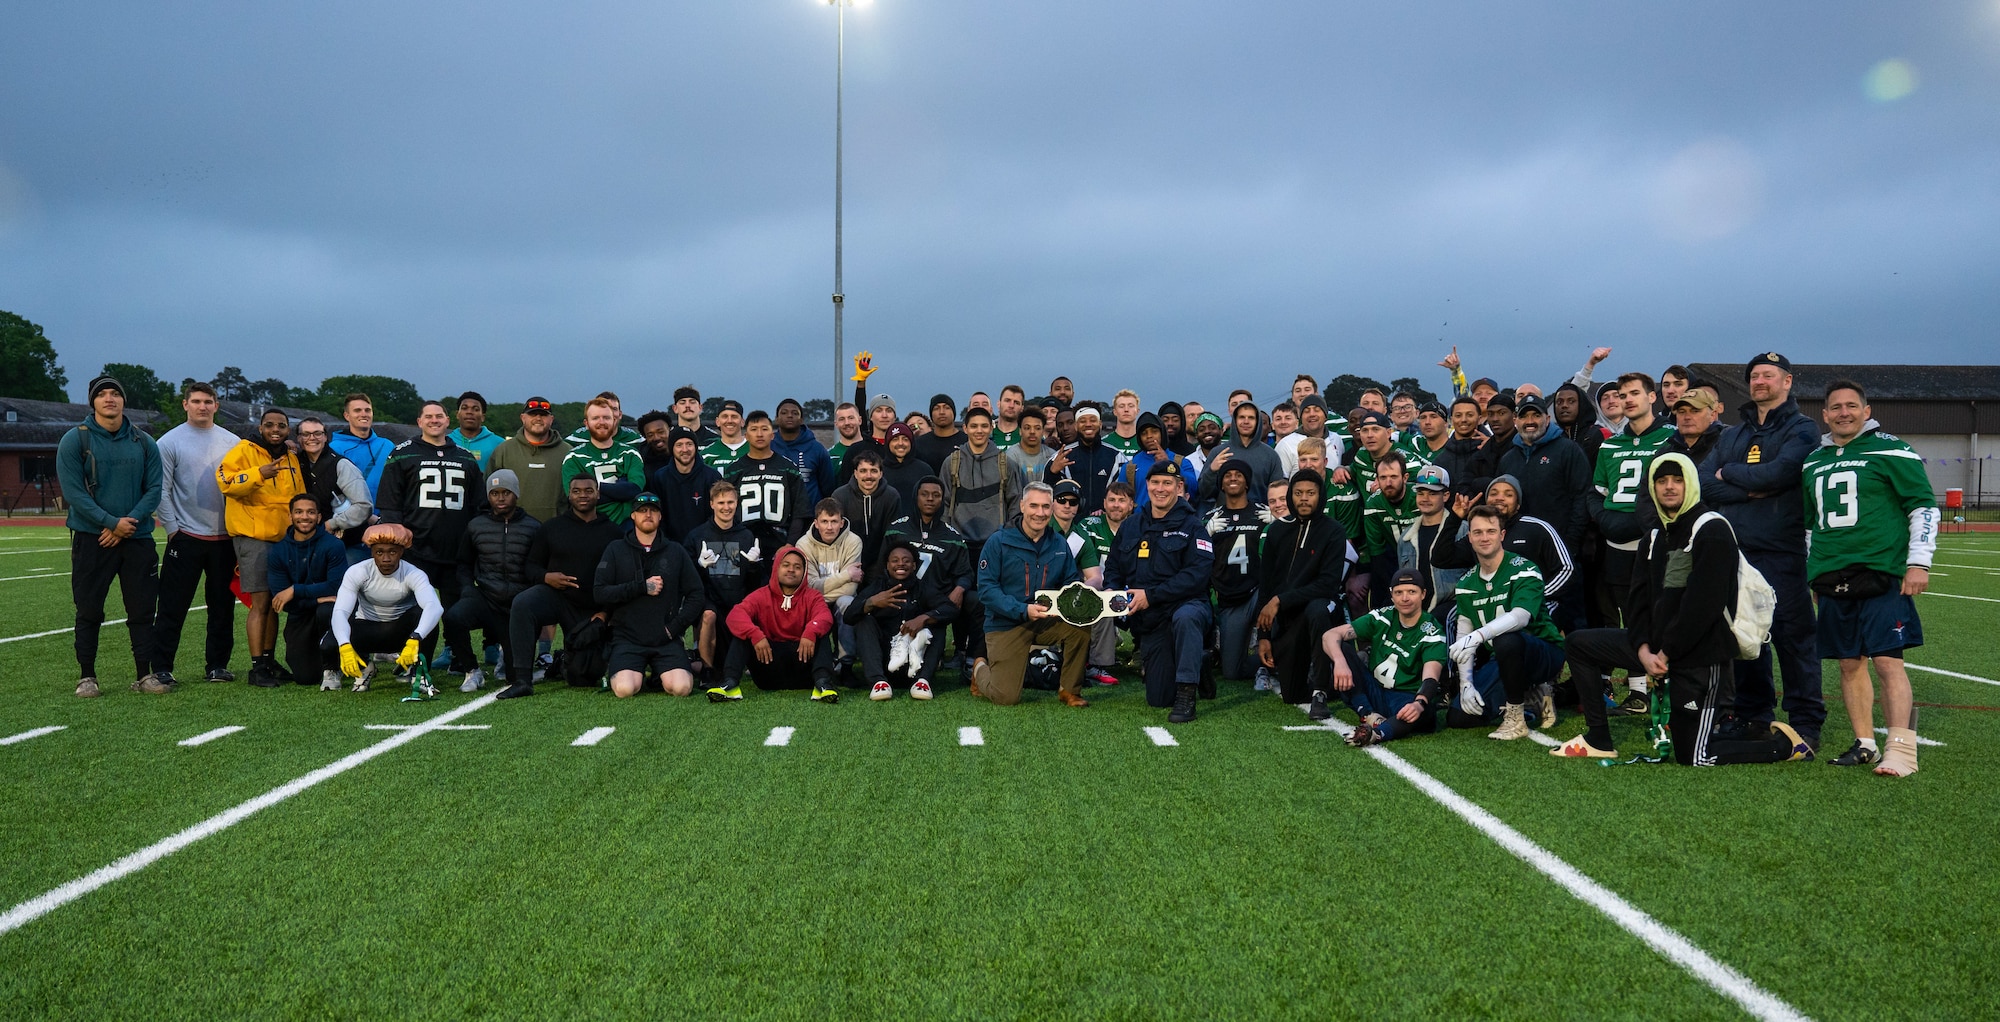 Group photo of U.S. Air Force and U.K. Armed Forces members posing for a photo after a flag football game at Royal Air Force Lakenheath